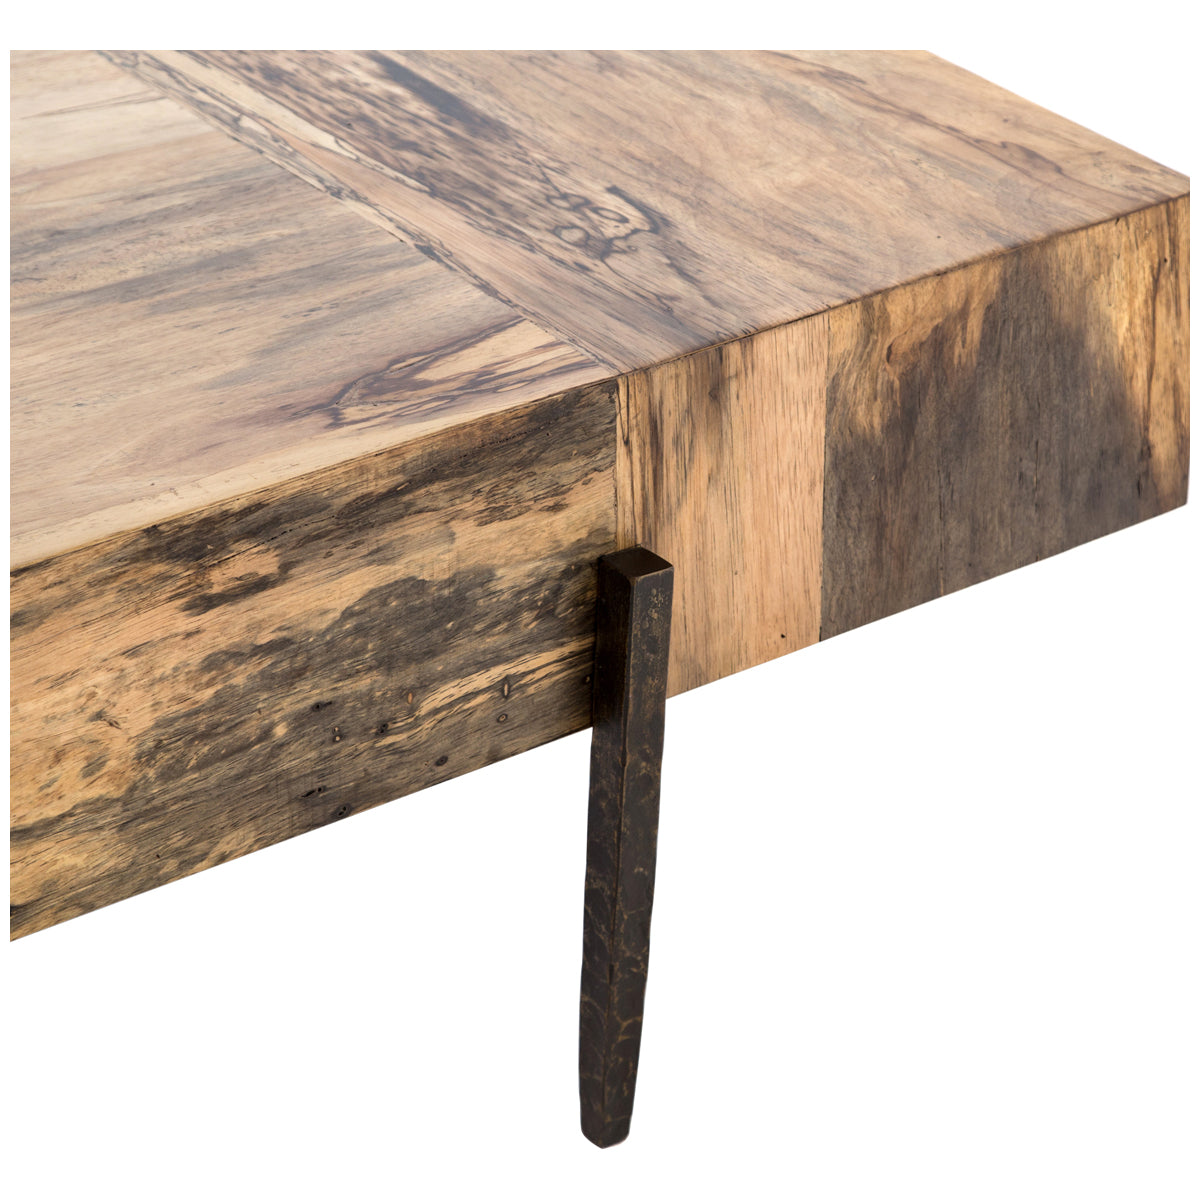 Four Hands Wesson Indra Coffee Table - Spalted Primavera